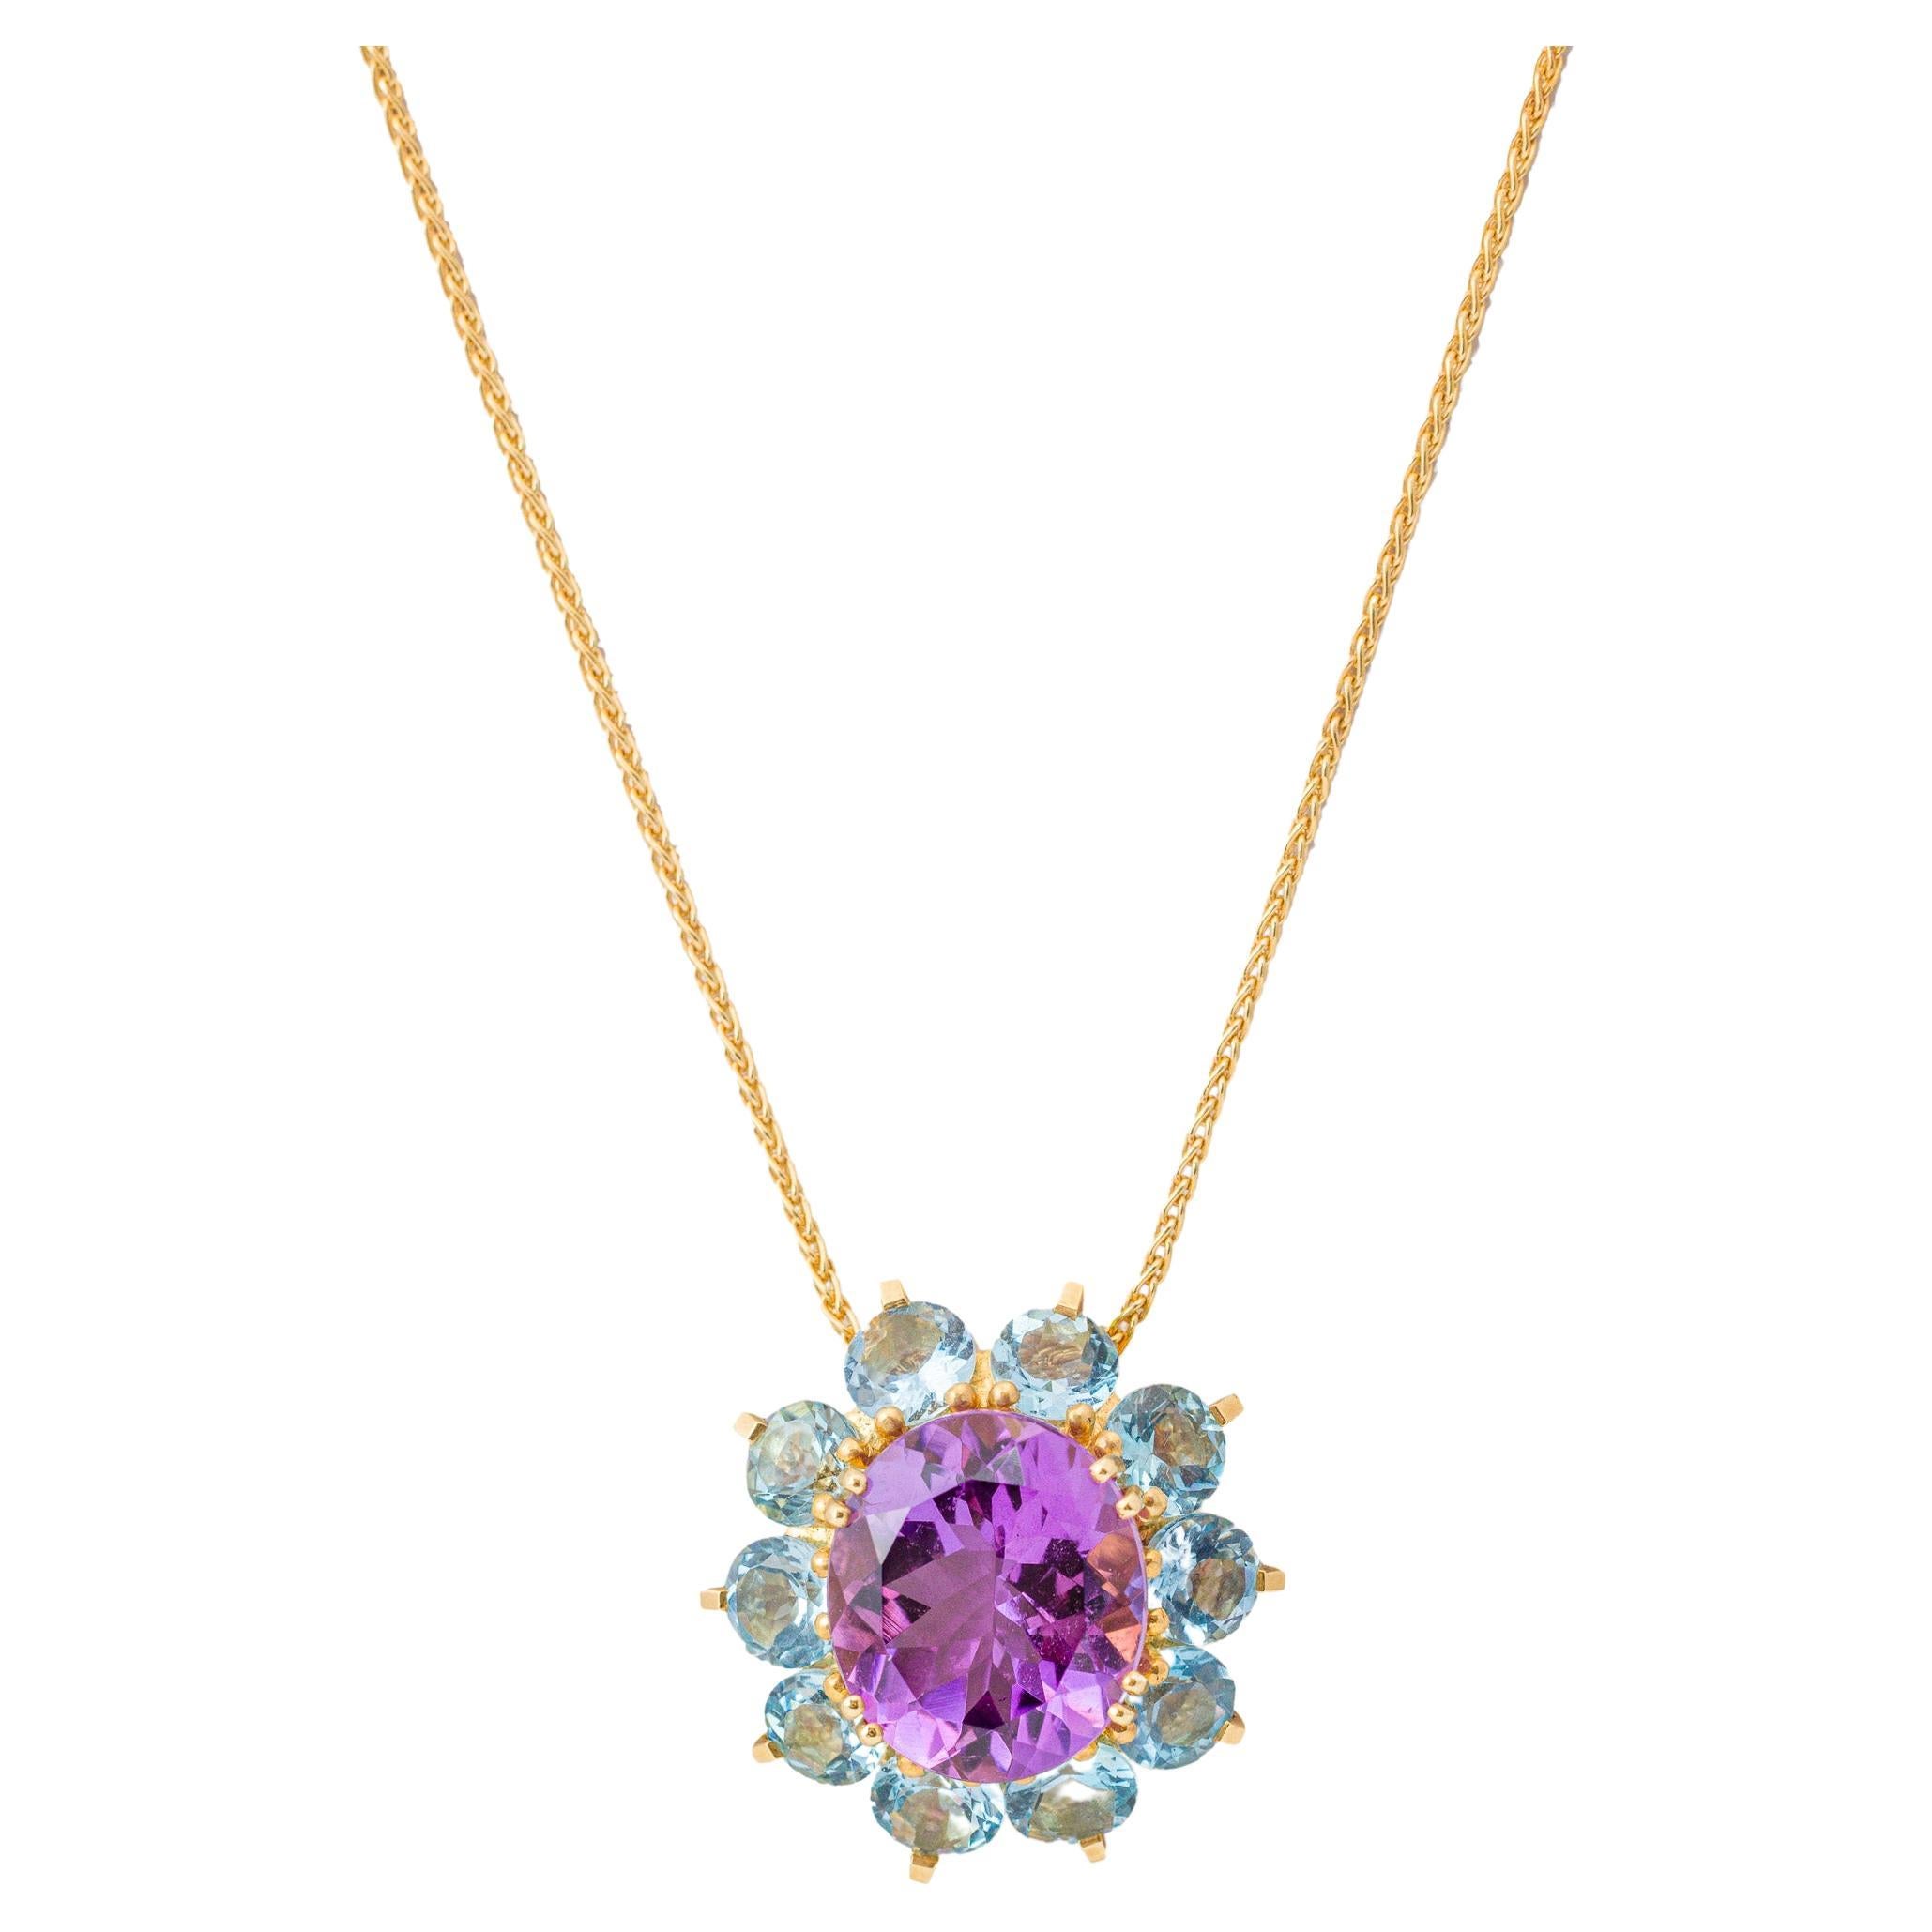 "Costis" Imperial Rosette Necklace - Central Amethyst, Aquamarines in 18K Gold For Sale